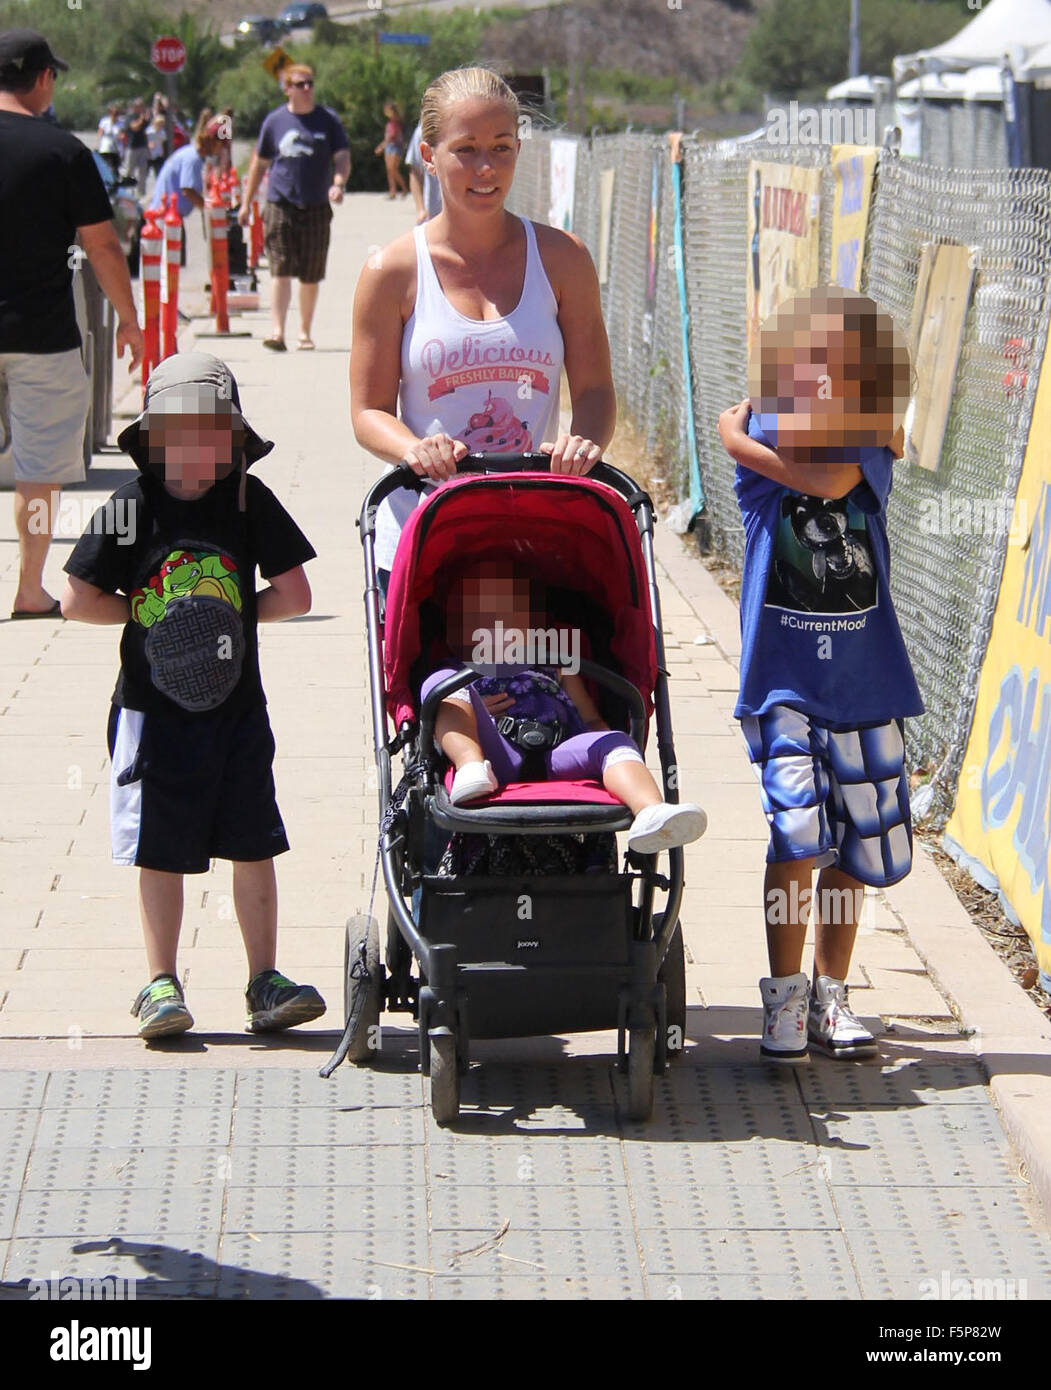 Former Playboy model Kendra Wilkinson out and about in Malibu with her children  Featuring: Kendra Wilkinson, Hank Baskett IV, Alijah Mary Baskett Where: Los Angeles, California, United States When: 06 Sep 2015 Stock Photo